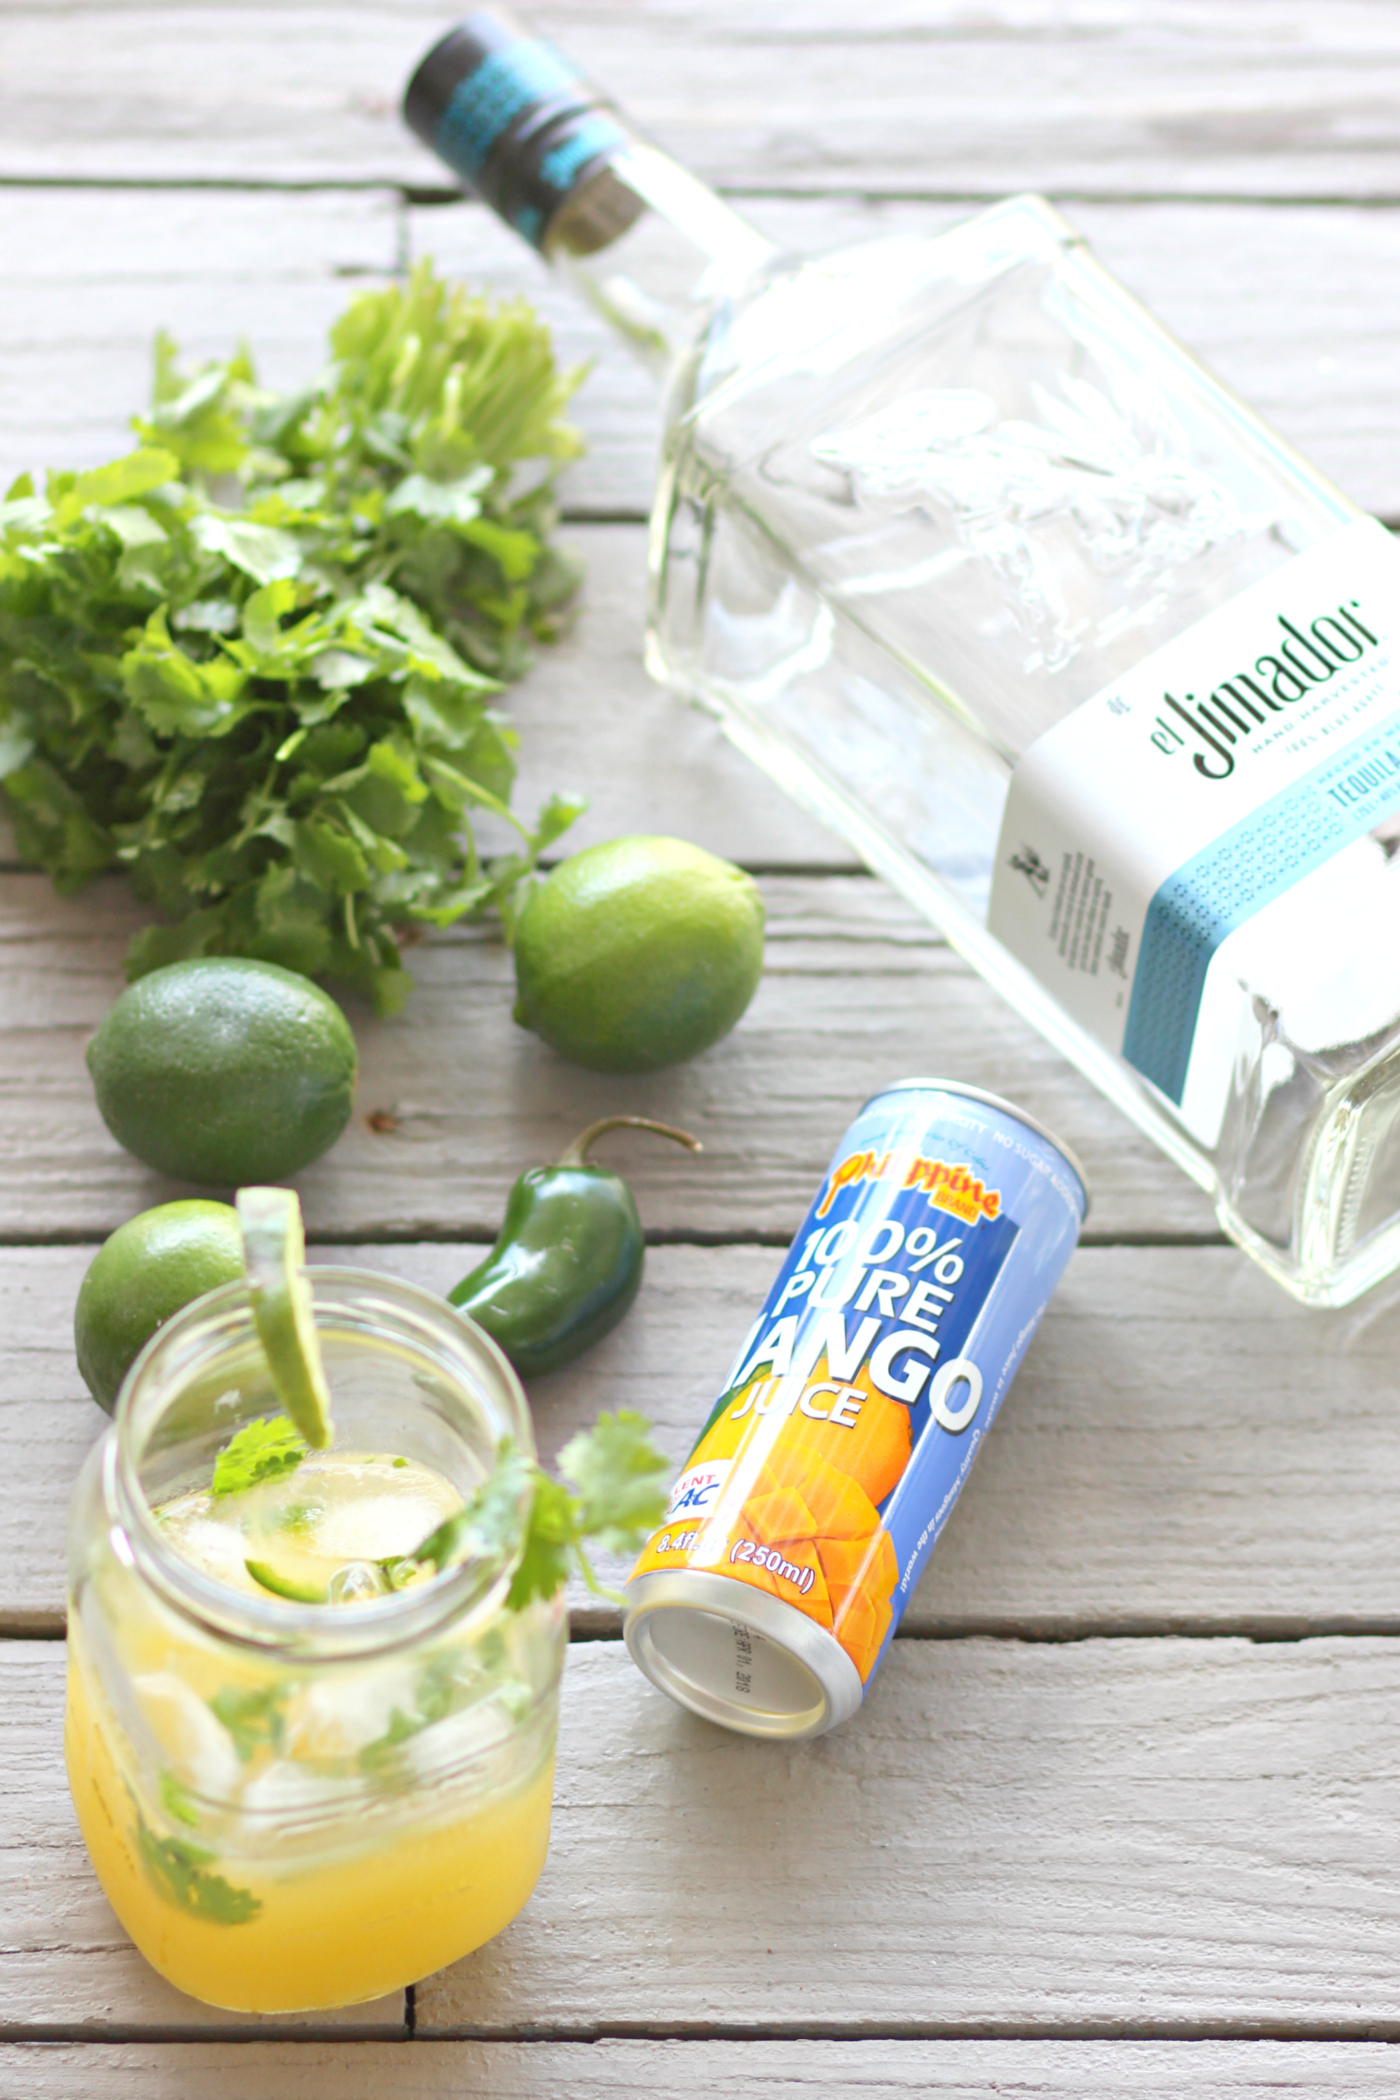 Ingredients for the best jalapeno margarita recipe by blogger Stephanie Ziajka on Diary of a Debutante